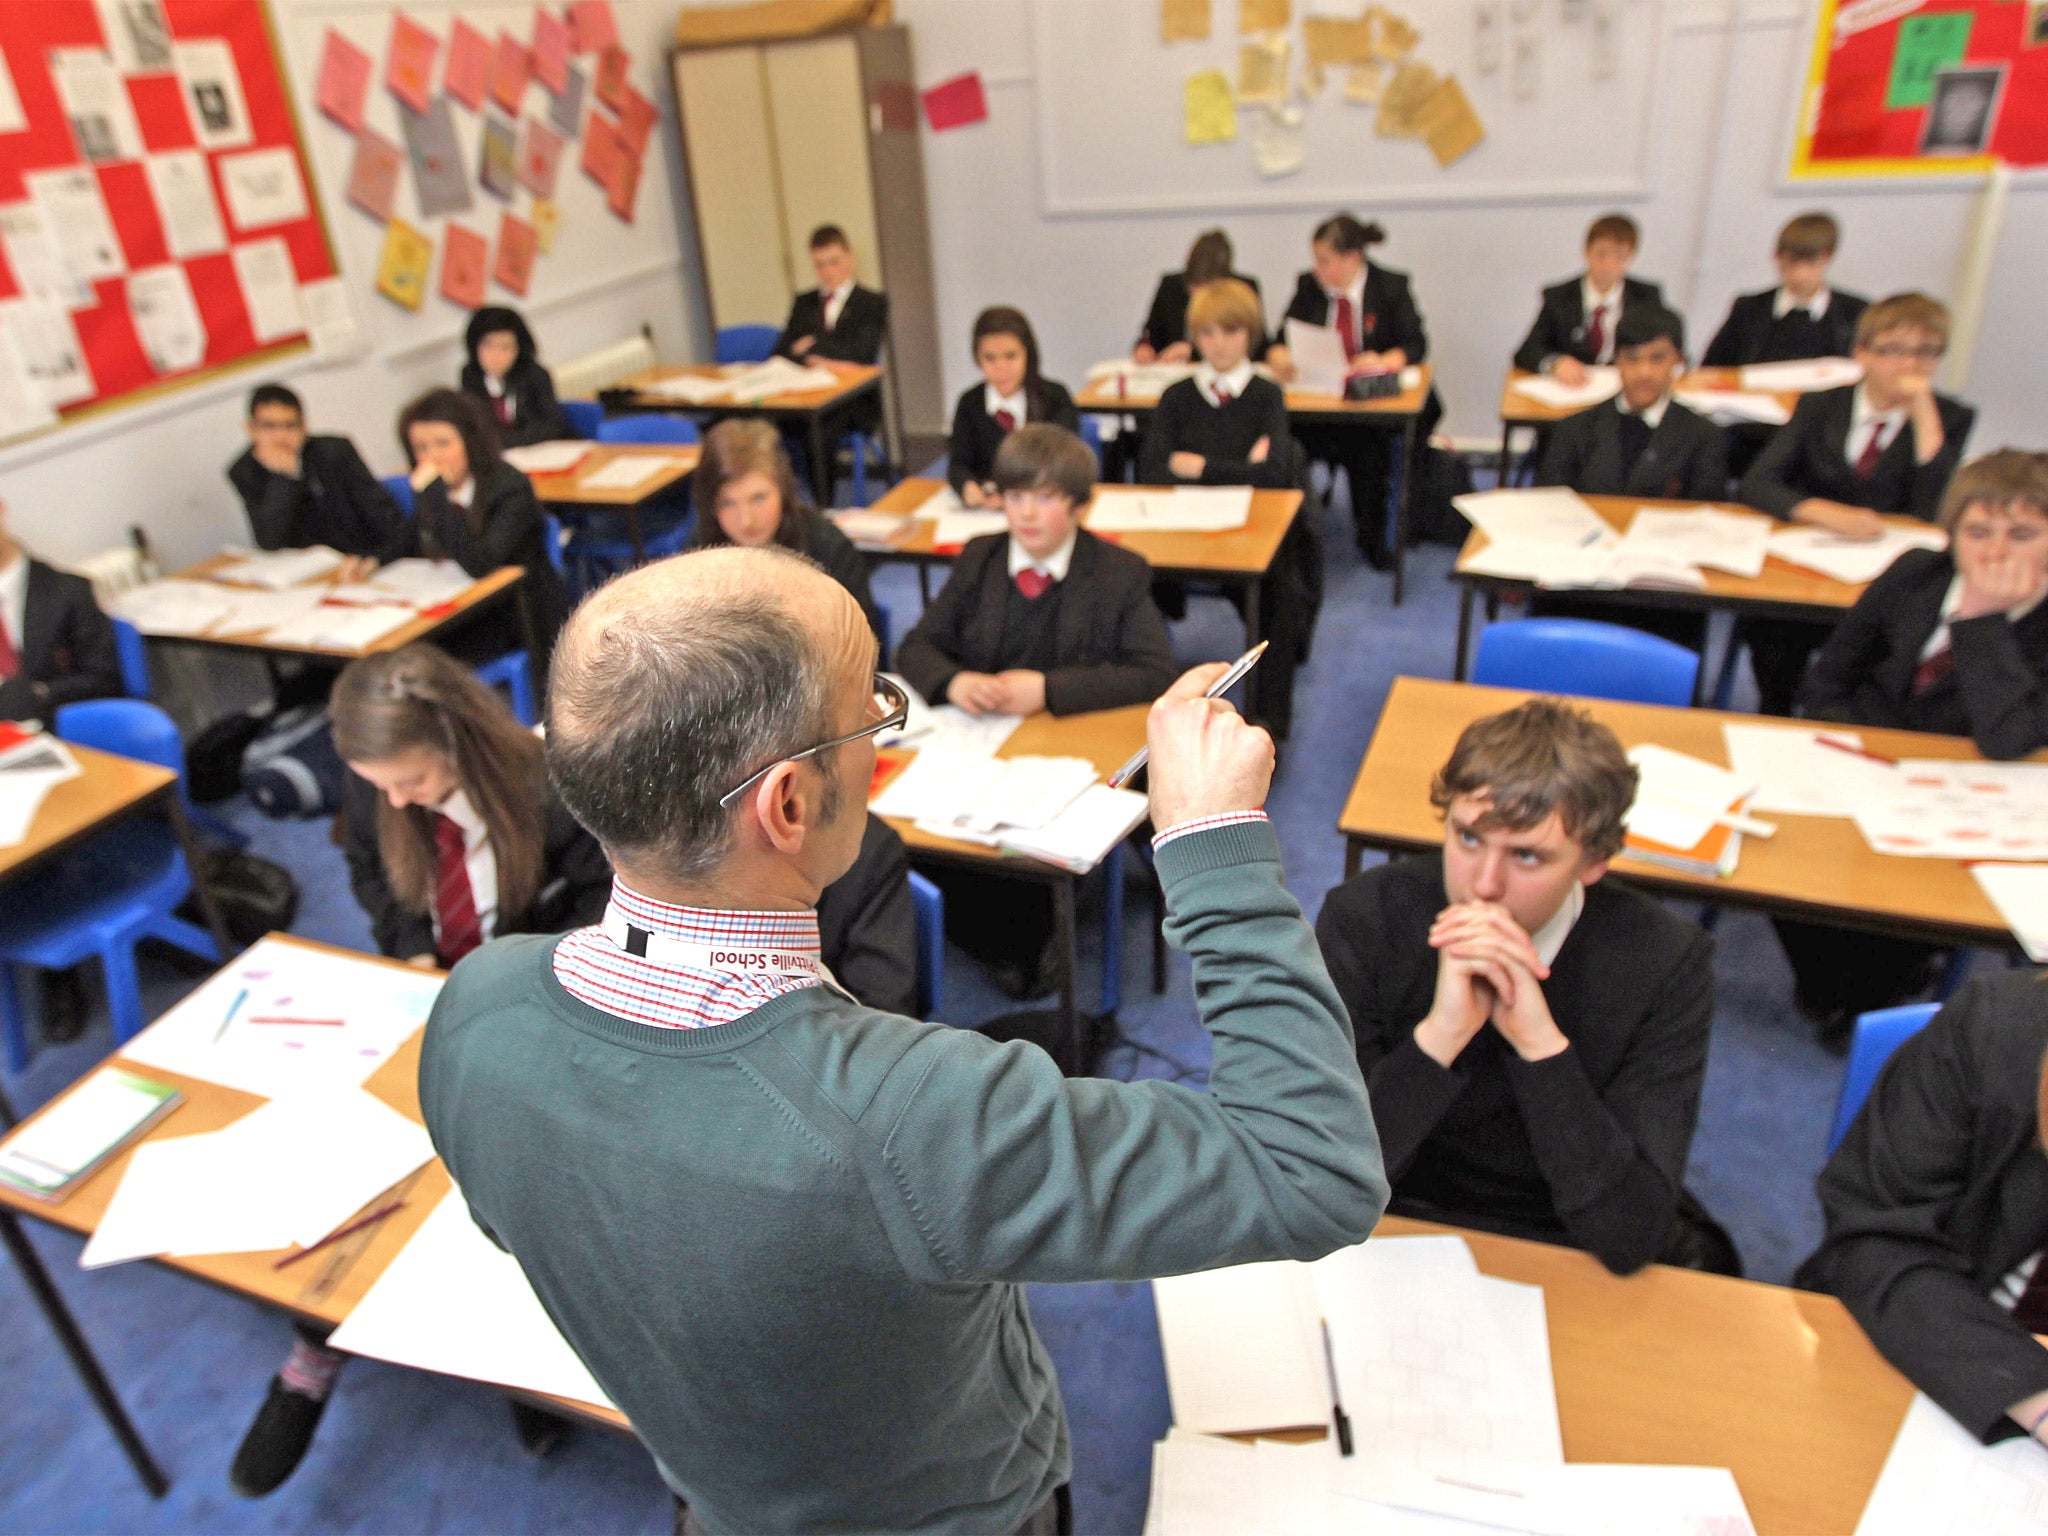 Public Concern at Work said many teachers had been left unsure who to approach when they saw something wrong at work